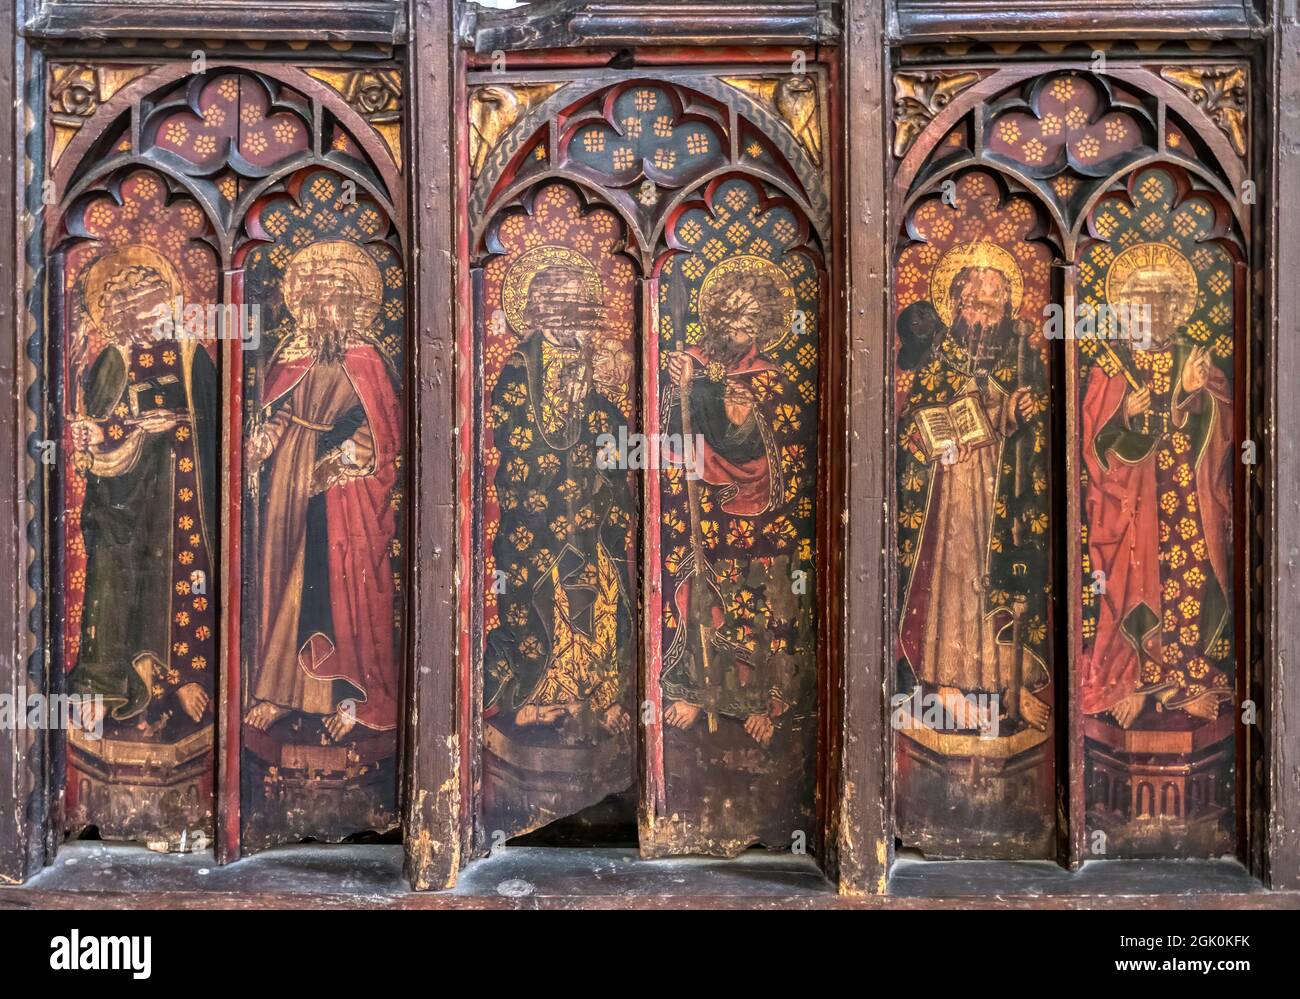 The only remaining panels of the mediaeval rood screen at All Saints Church, King's Lynn.  Details in Description. Stock Photo